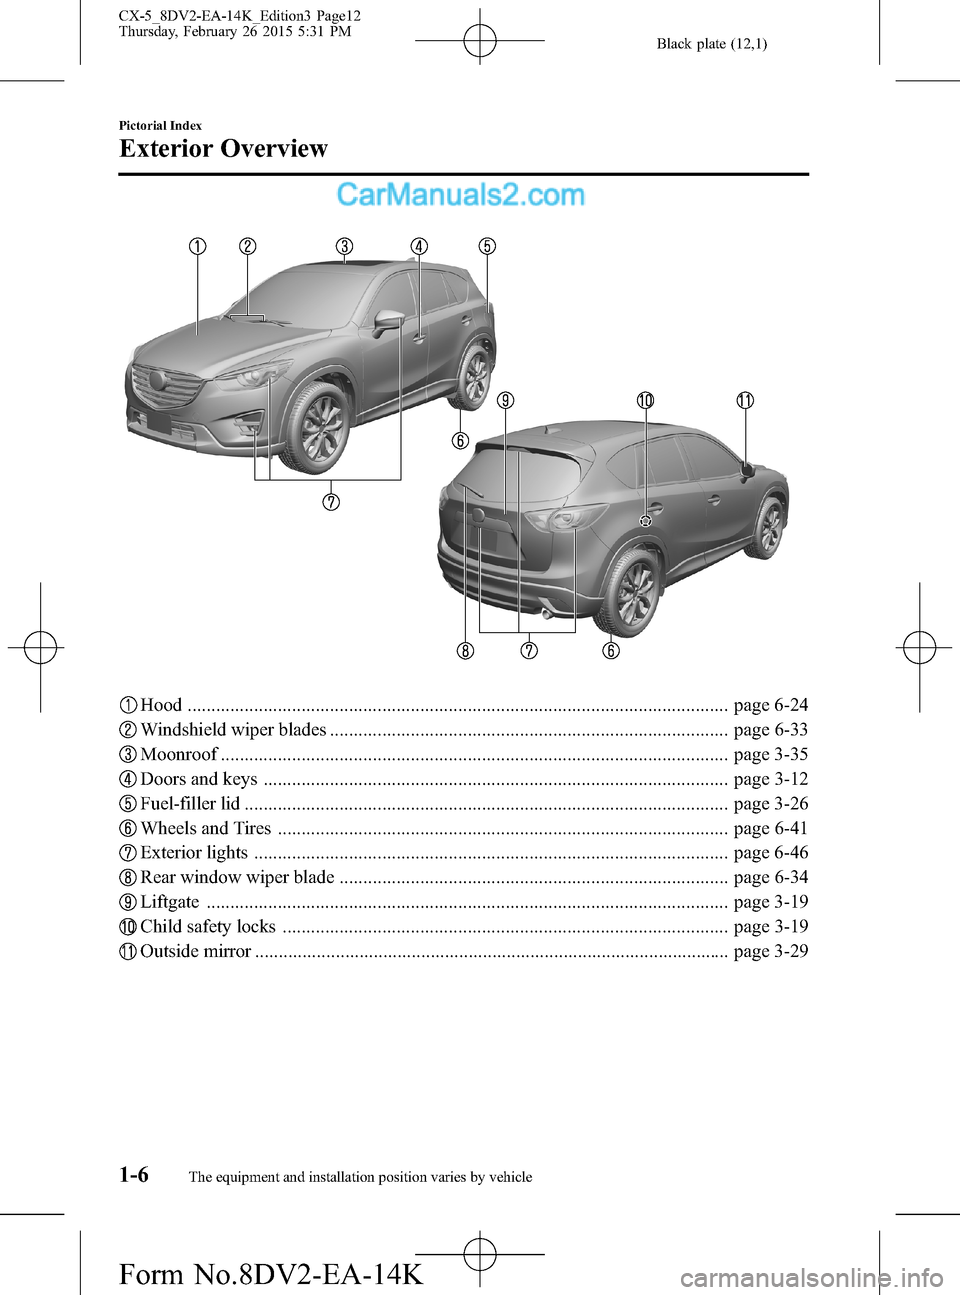 MAZDA MODEL CX-5 2016  Owners Manual (in English) Black plate (12,1)
Hood .................................................................................................................. page 6-24
Windshield wiper blades ...........................